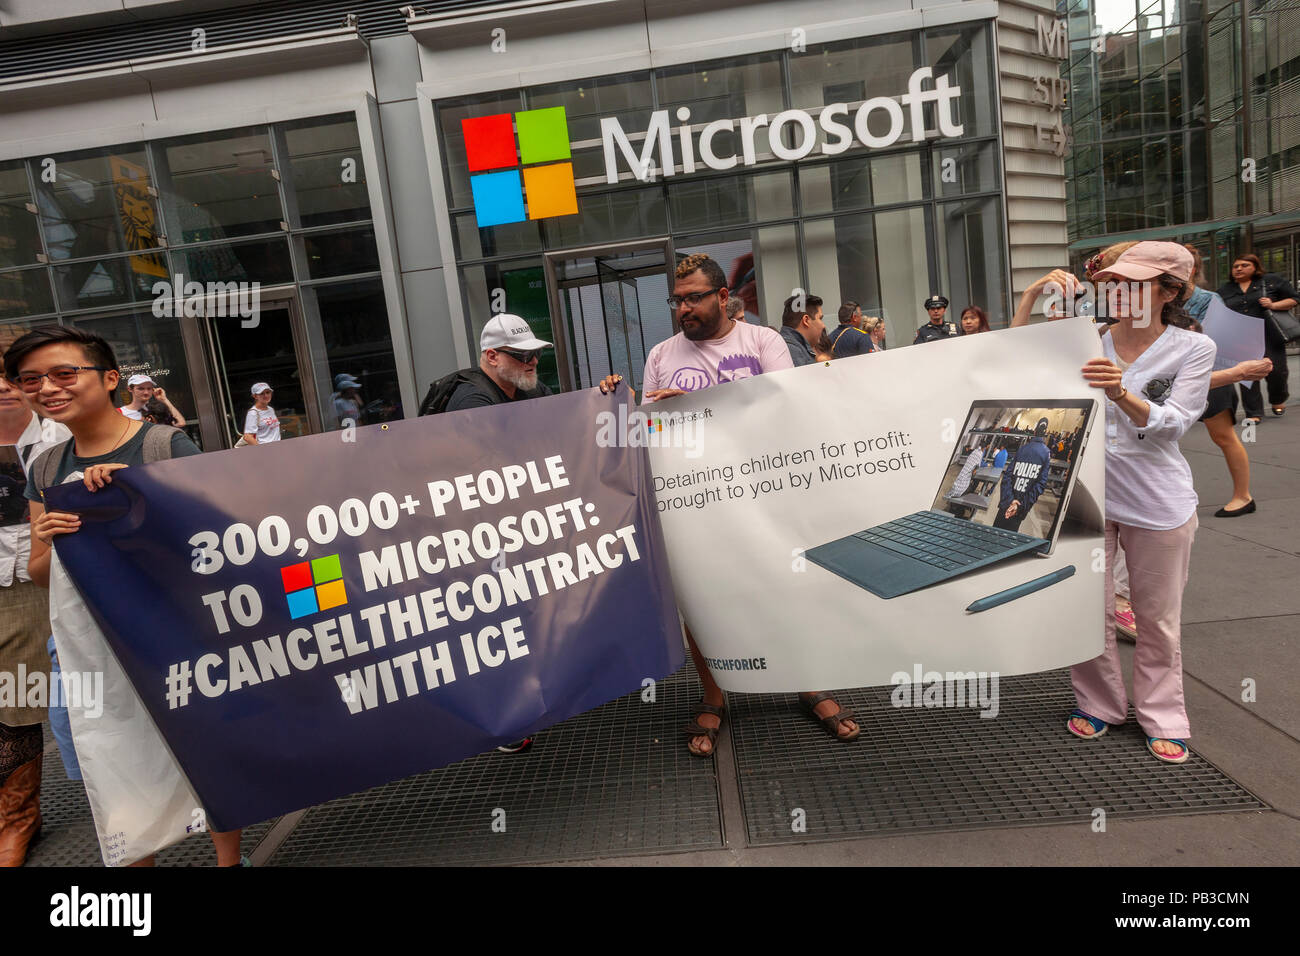 New York, USA. 26th July 2018. Activists gather in front of Microsoft's New York offices on Thursday, July 26, 2018  to protest the tech company supplying technology to Immigration and Customs Enforcement (ICE).Over 300,000 have signed petitions calling on Microsoft to cancel their contract with ICE because of ICE's activities separating immigrant parents from their children. Similar protests are taking place at other Microsoft offices around the country. (Â© Richard B. Levine) Credit: Richard Levine/Alamy Live News Stock Photo